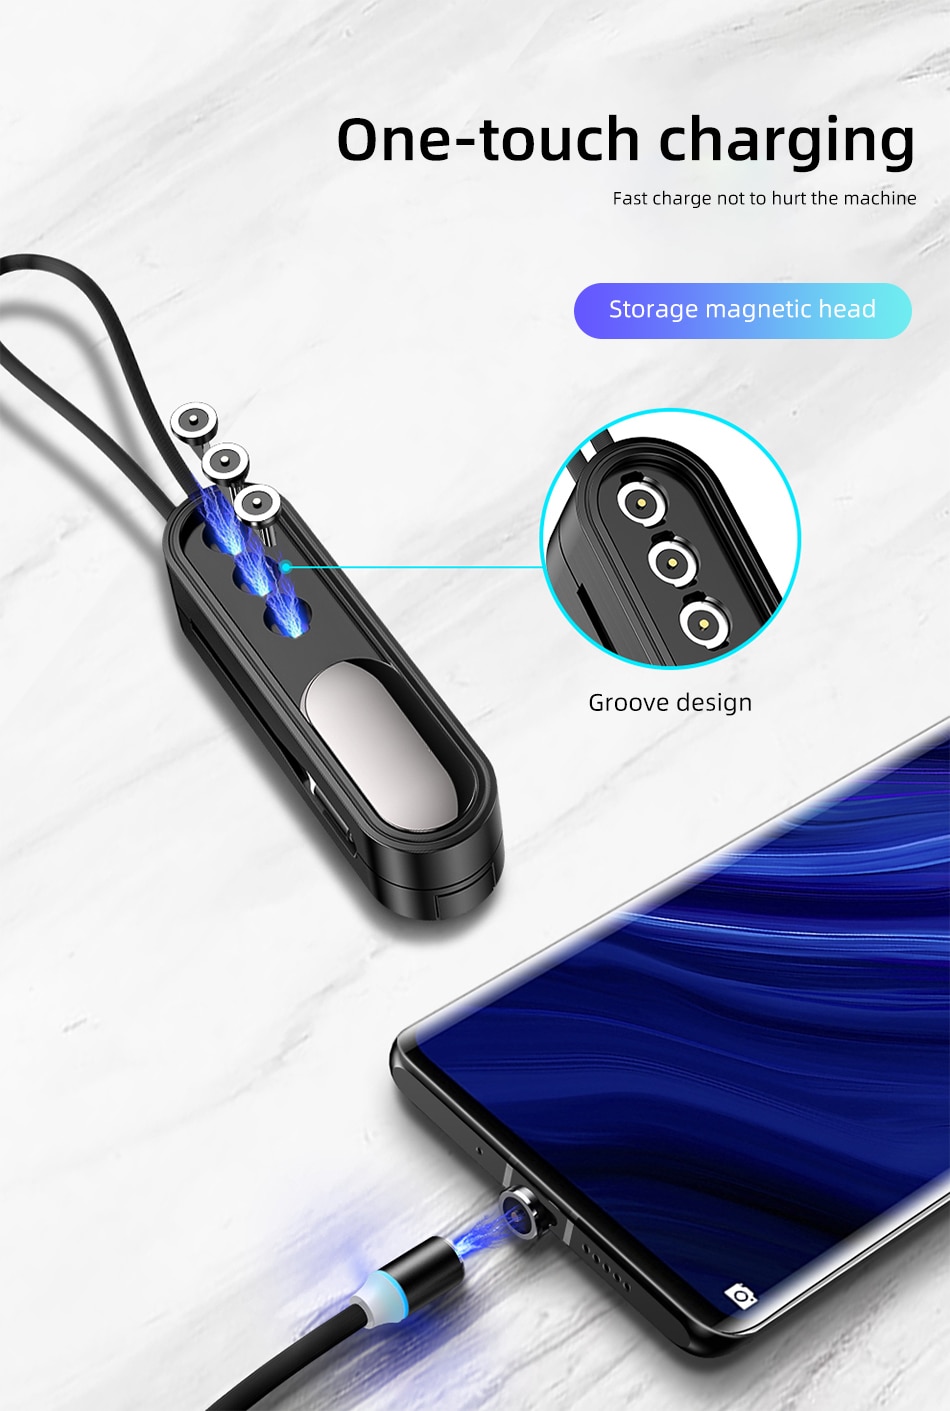 3-in-1 magnetic portable charging cable